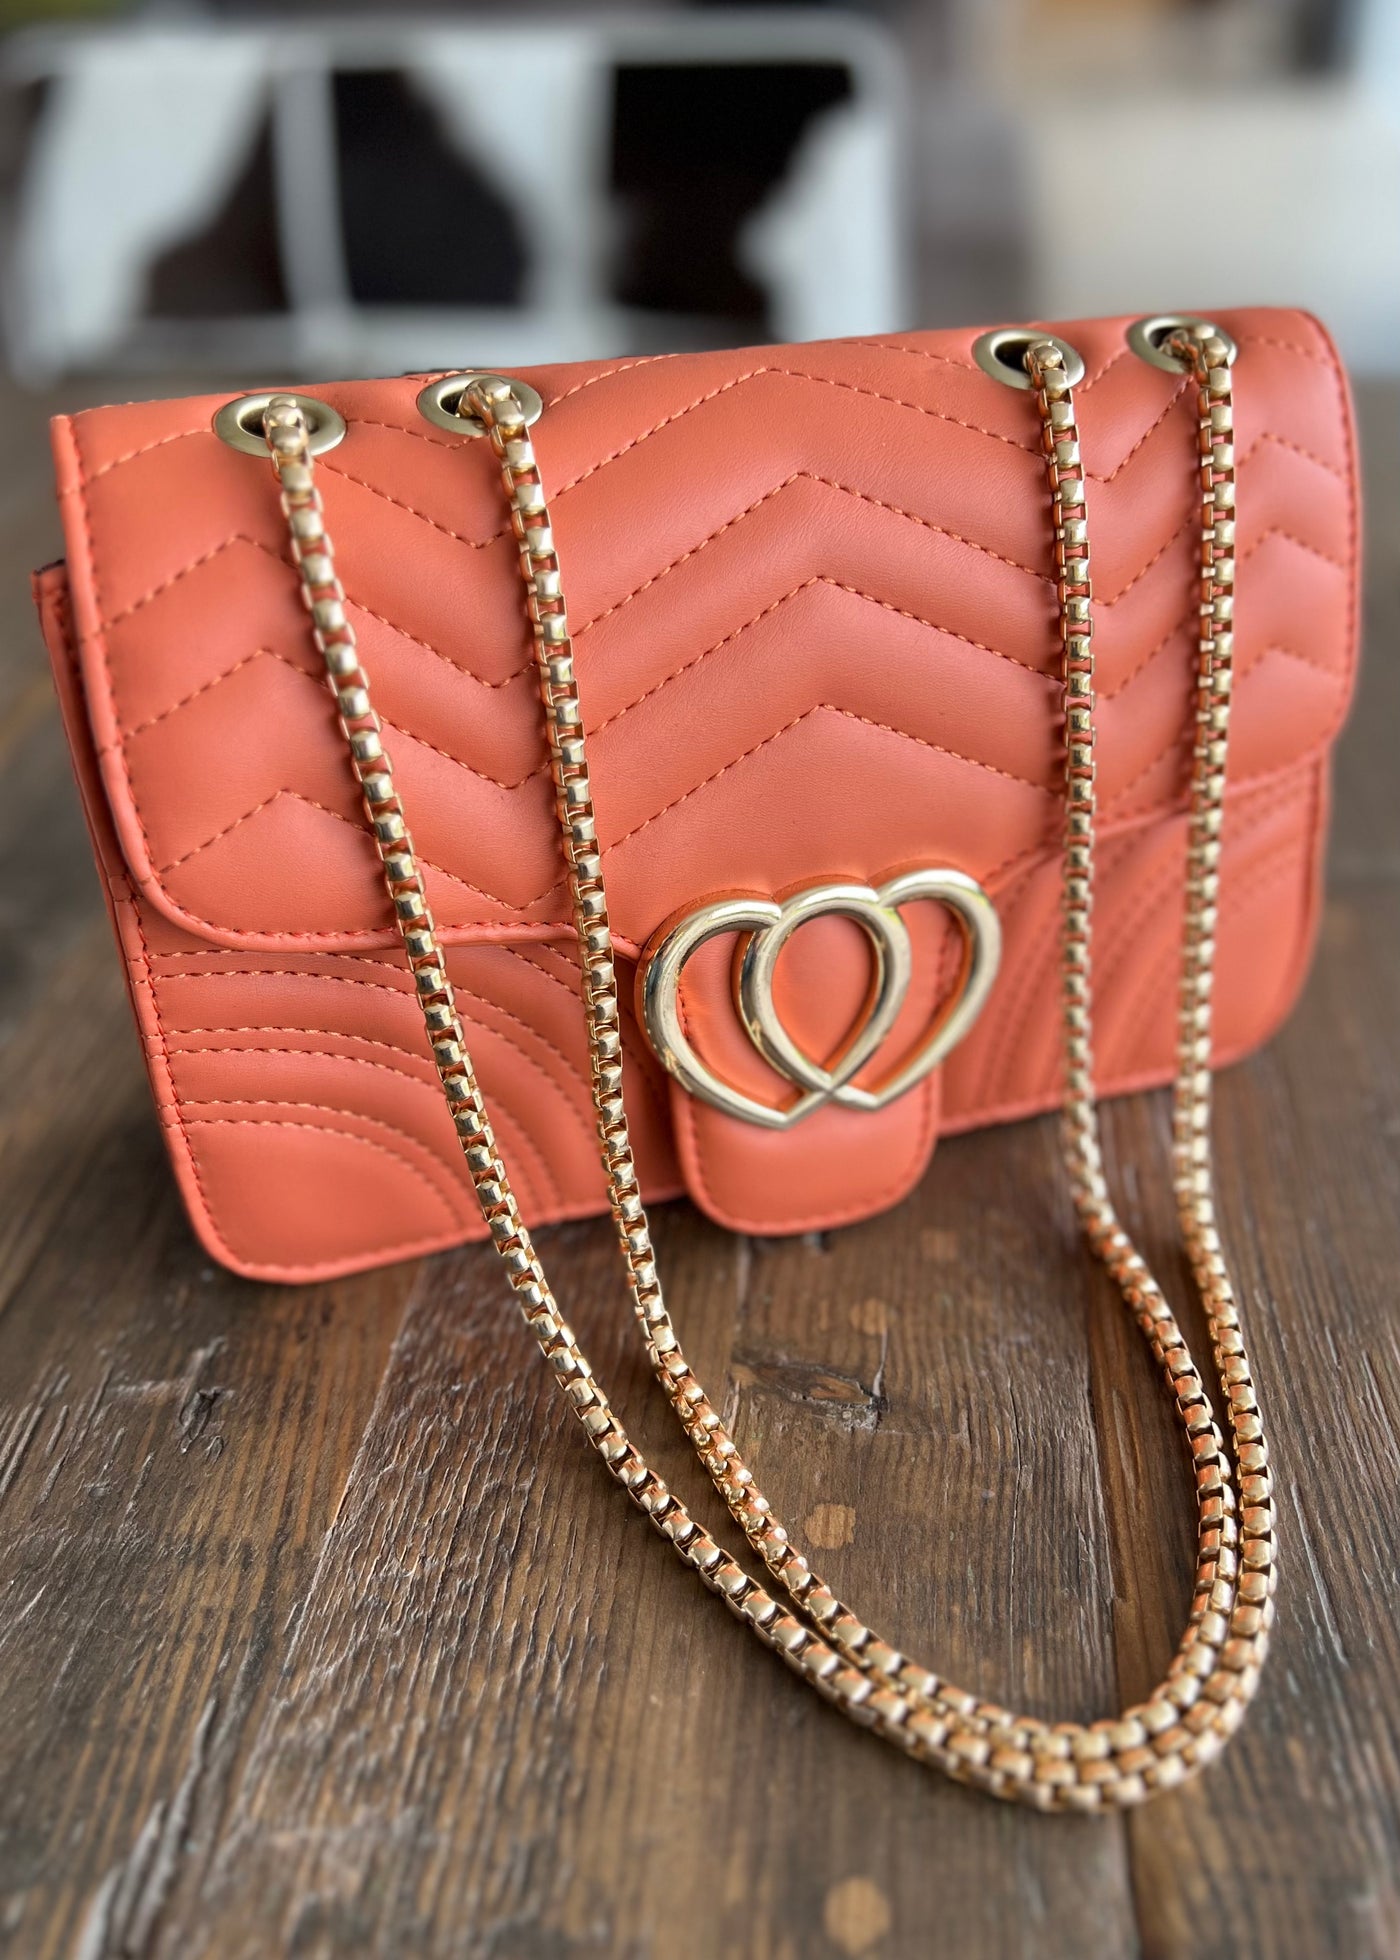 Orange Heart Bag With Gold Chain